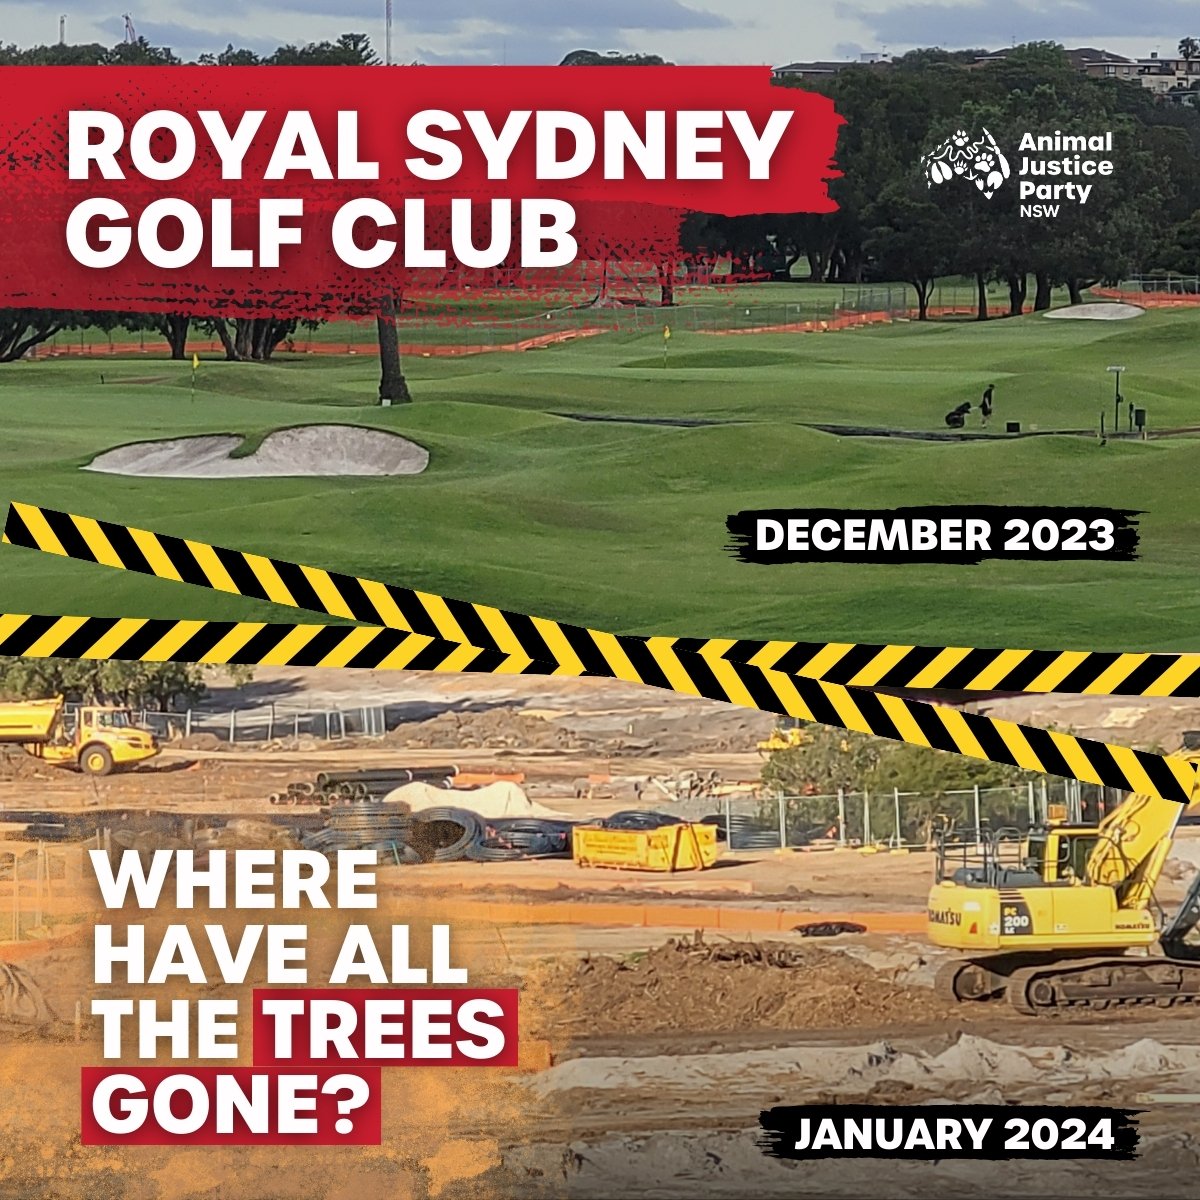 The local habitat has been devastated by the Royal Sydney Golf Club. Their development has already destroyed 595 old-growth trees. Hundreds more are at risk. Countless animals have been killed and many more are left with no food and no home.